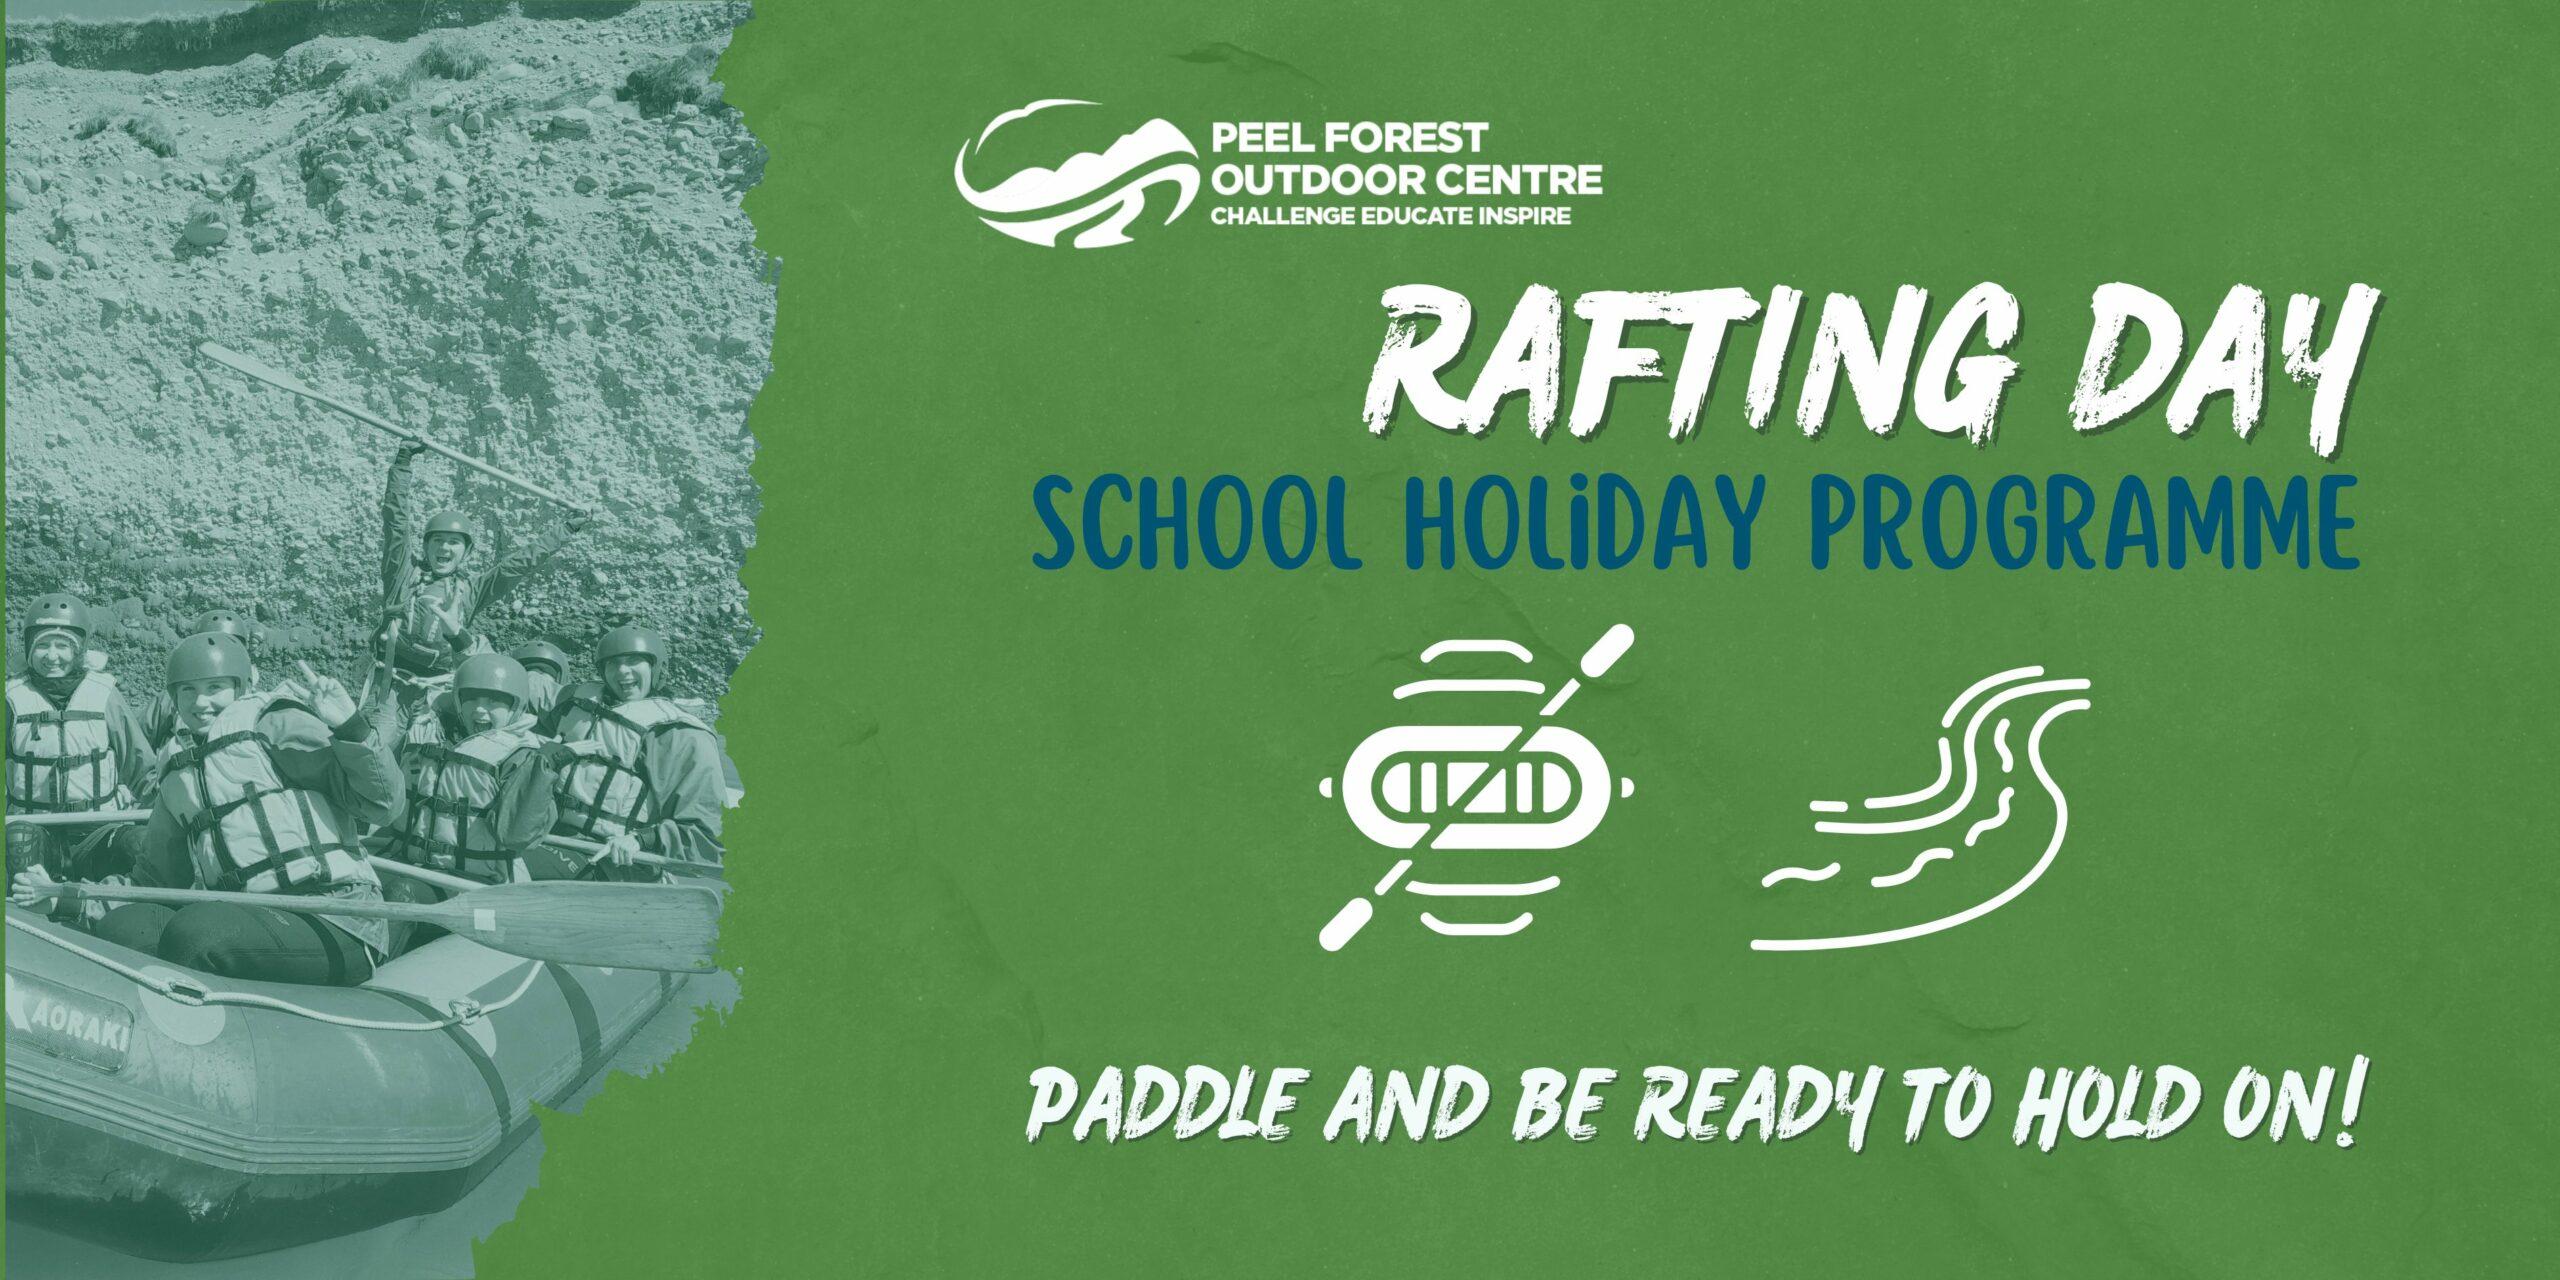 Holiday Programme - Rafting Day